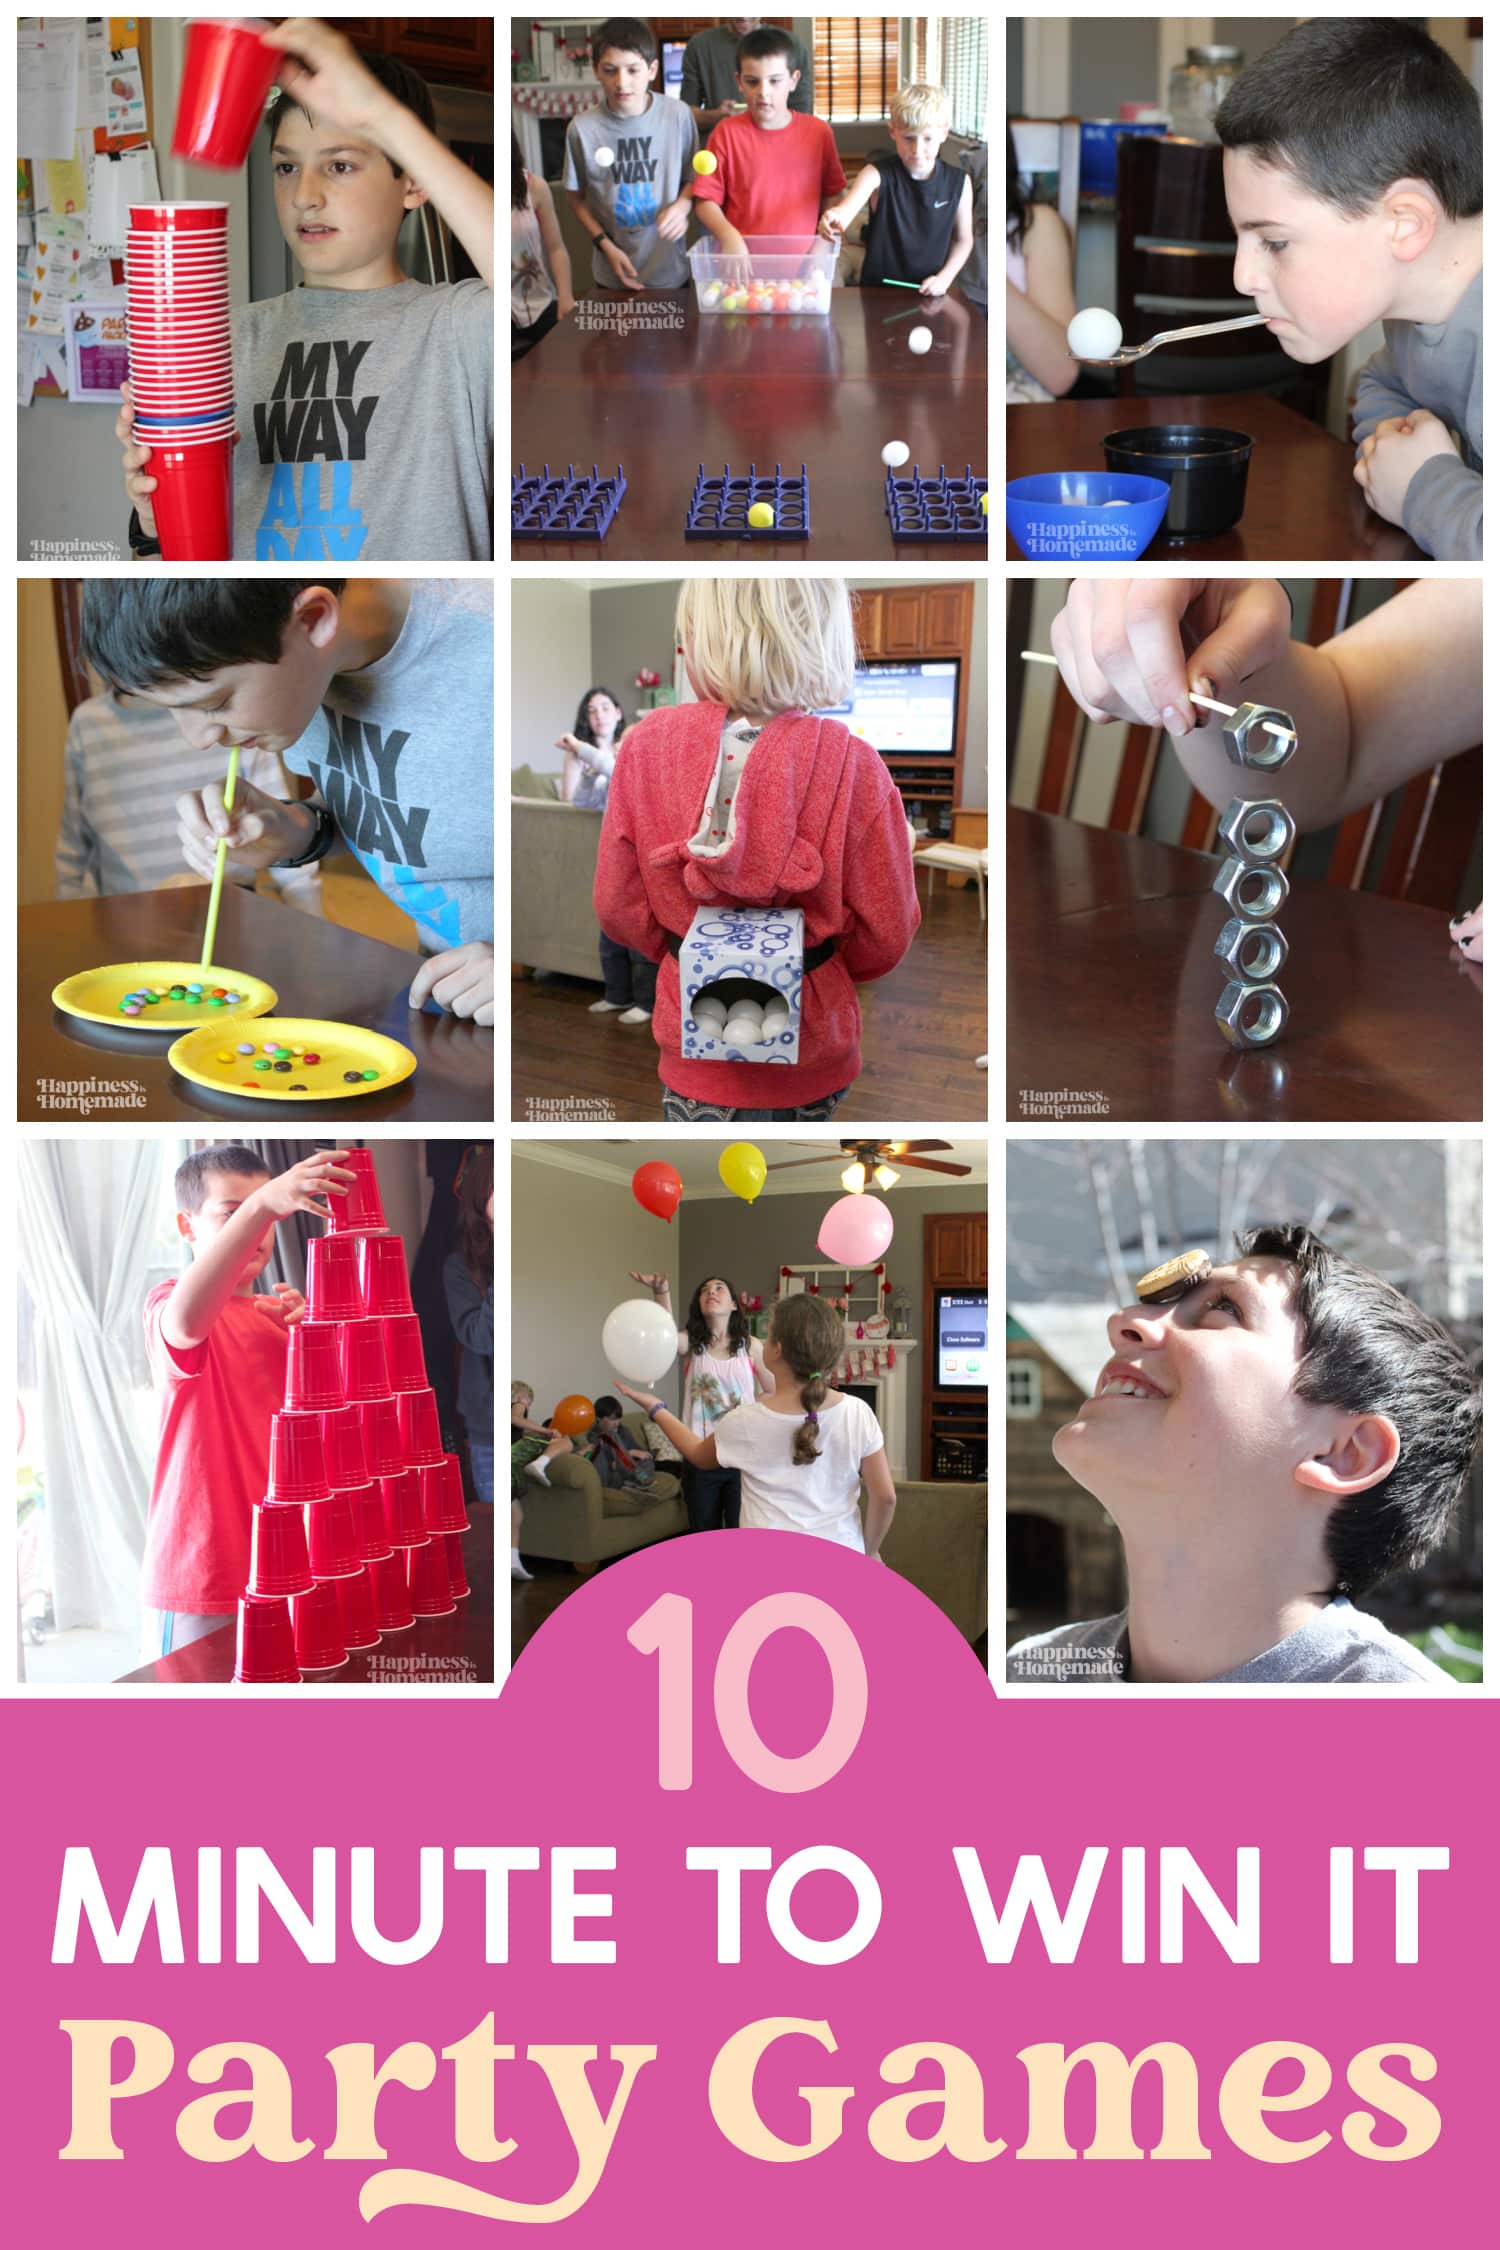 5 Minute to Win It Games Kids & Adults Will Love  Minute to win it games,  Minute to win it, Fun couple activities